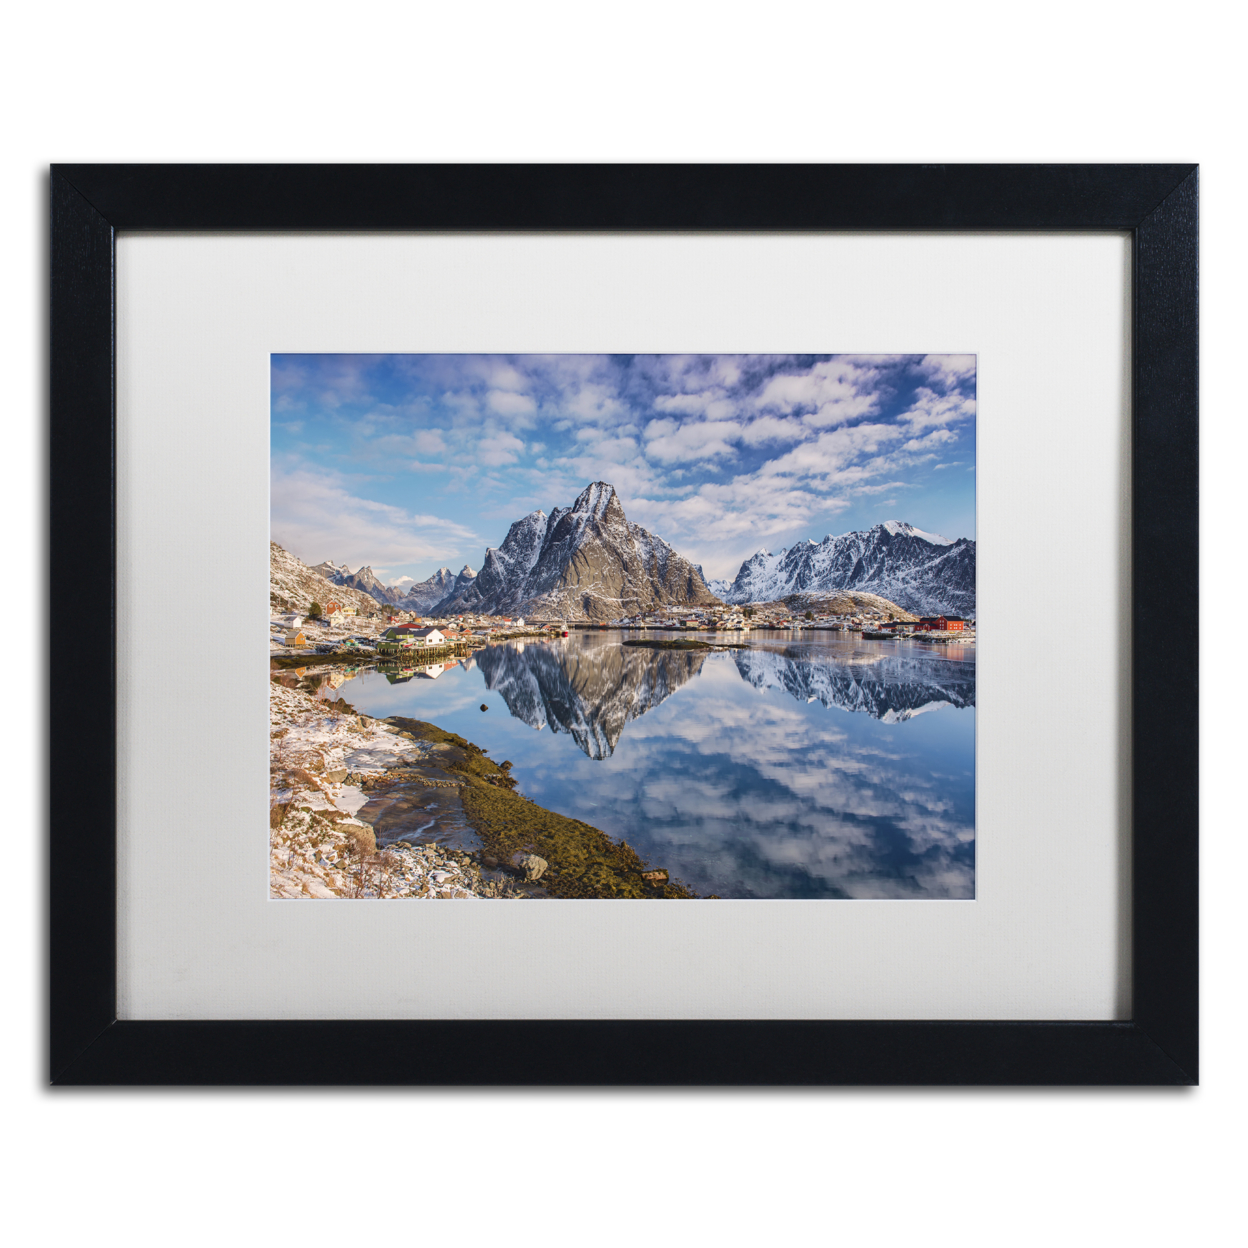 Michael Blanchette Photography 'Mirror In The Fjord' Black Wooden Framed Art 18 X 22 Inches